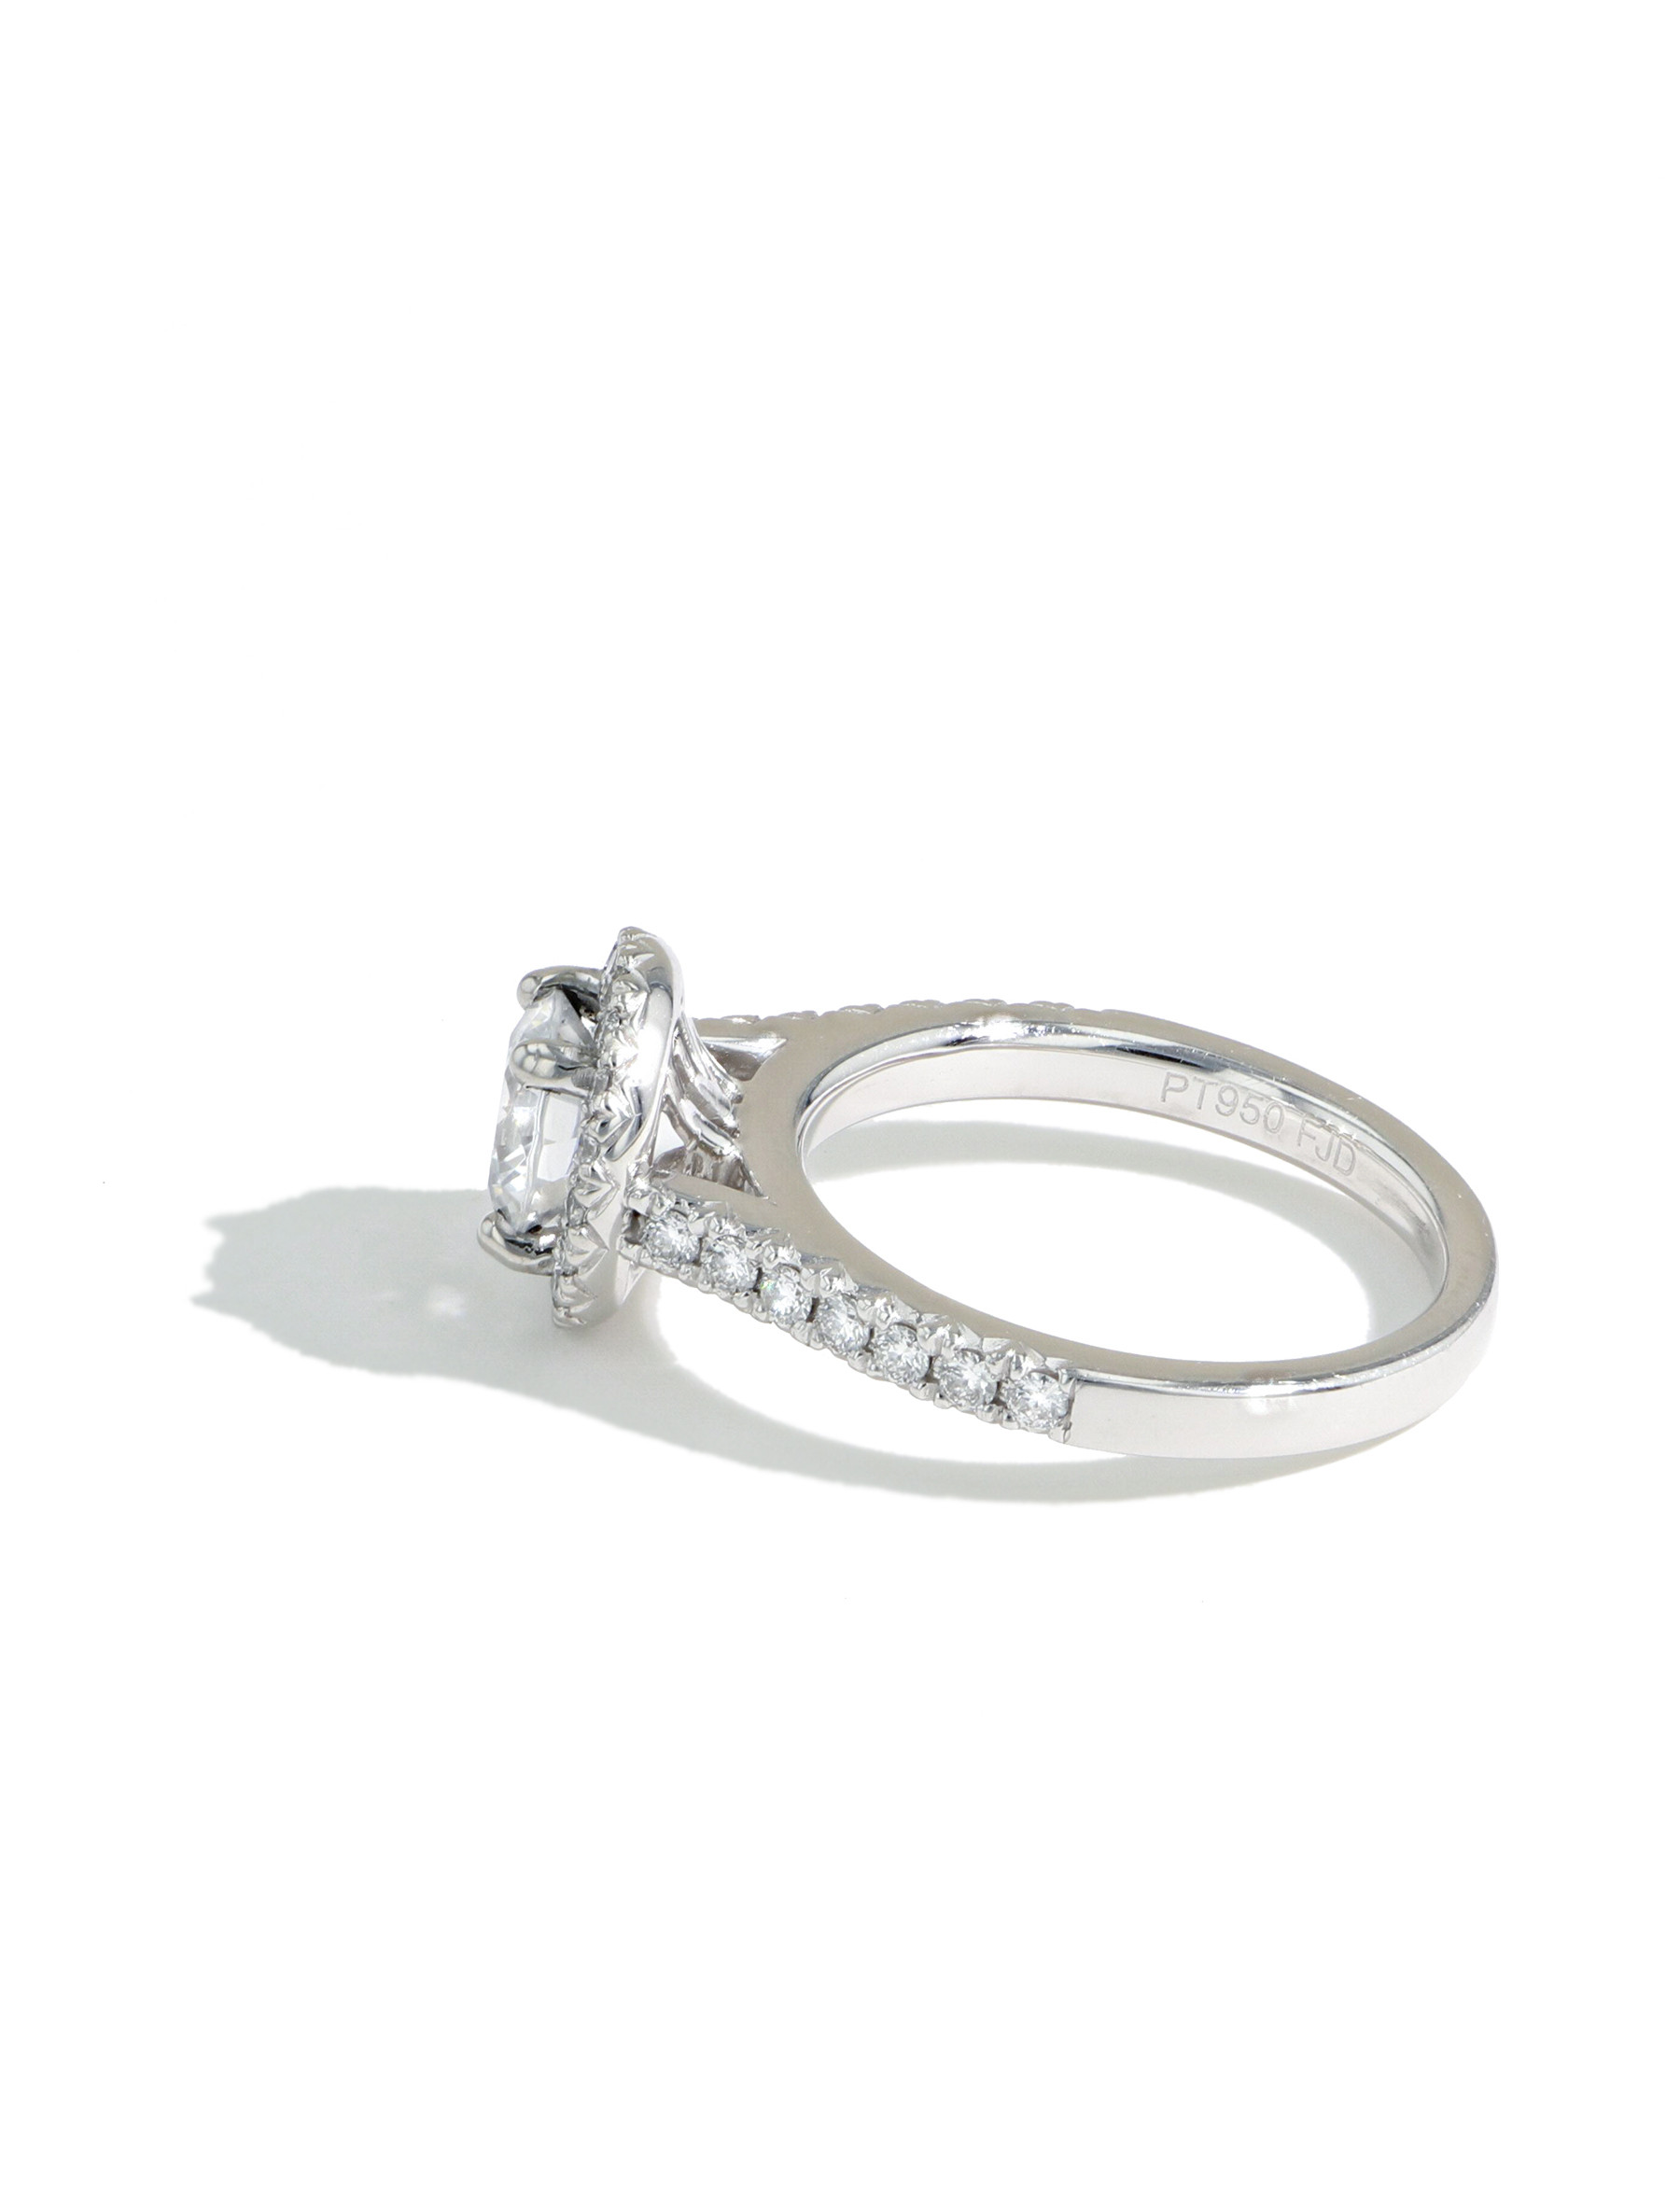 The Round Halo Pave Diamond Engagement Ring Setting side view